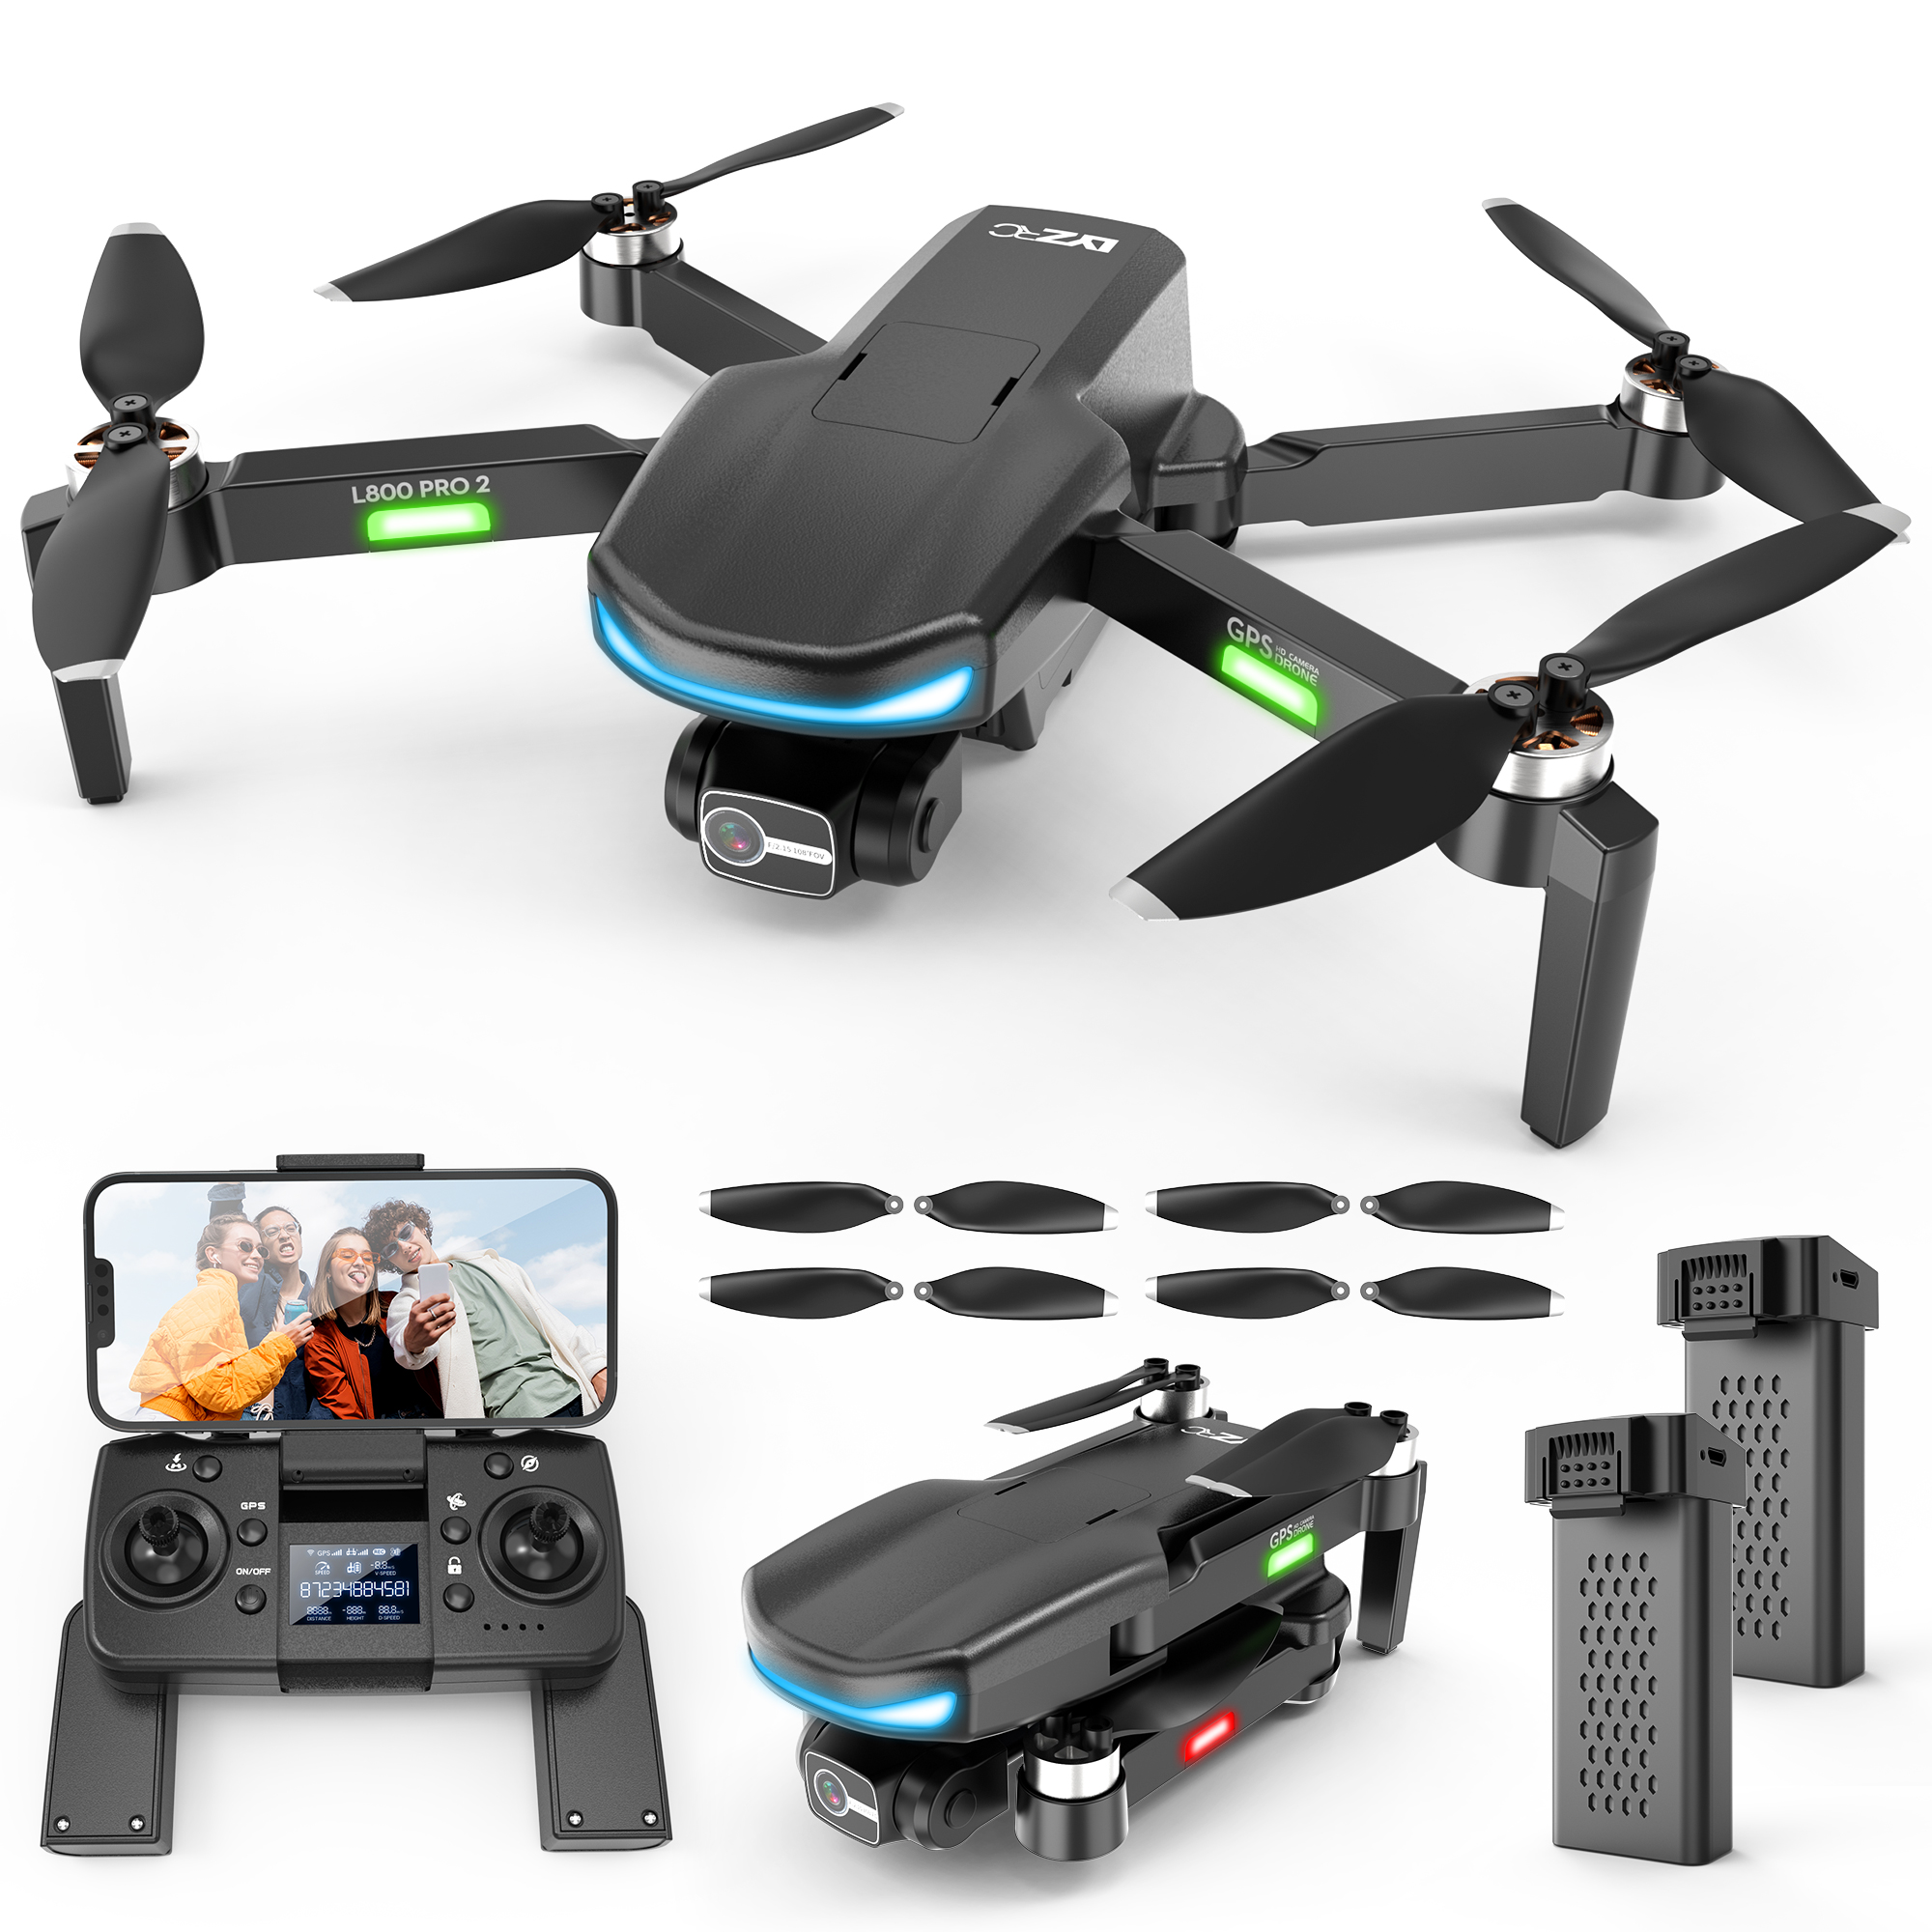 L800 Pro2 GPS Drone with 4K HD Camera, 3-Axis Gimbal, and Smart Li-Po Battery - Perfect for Adults and Beginners, FPV RC Quadcopter with Brushless Motor, 5G WIFI Transmission, 2 Batteries, Black - image 1 of 15